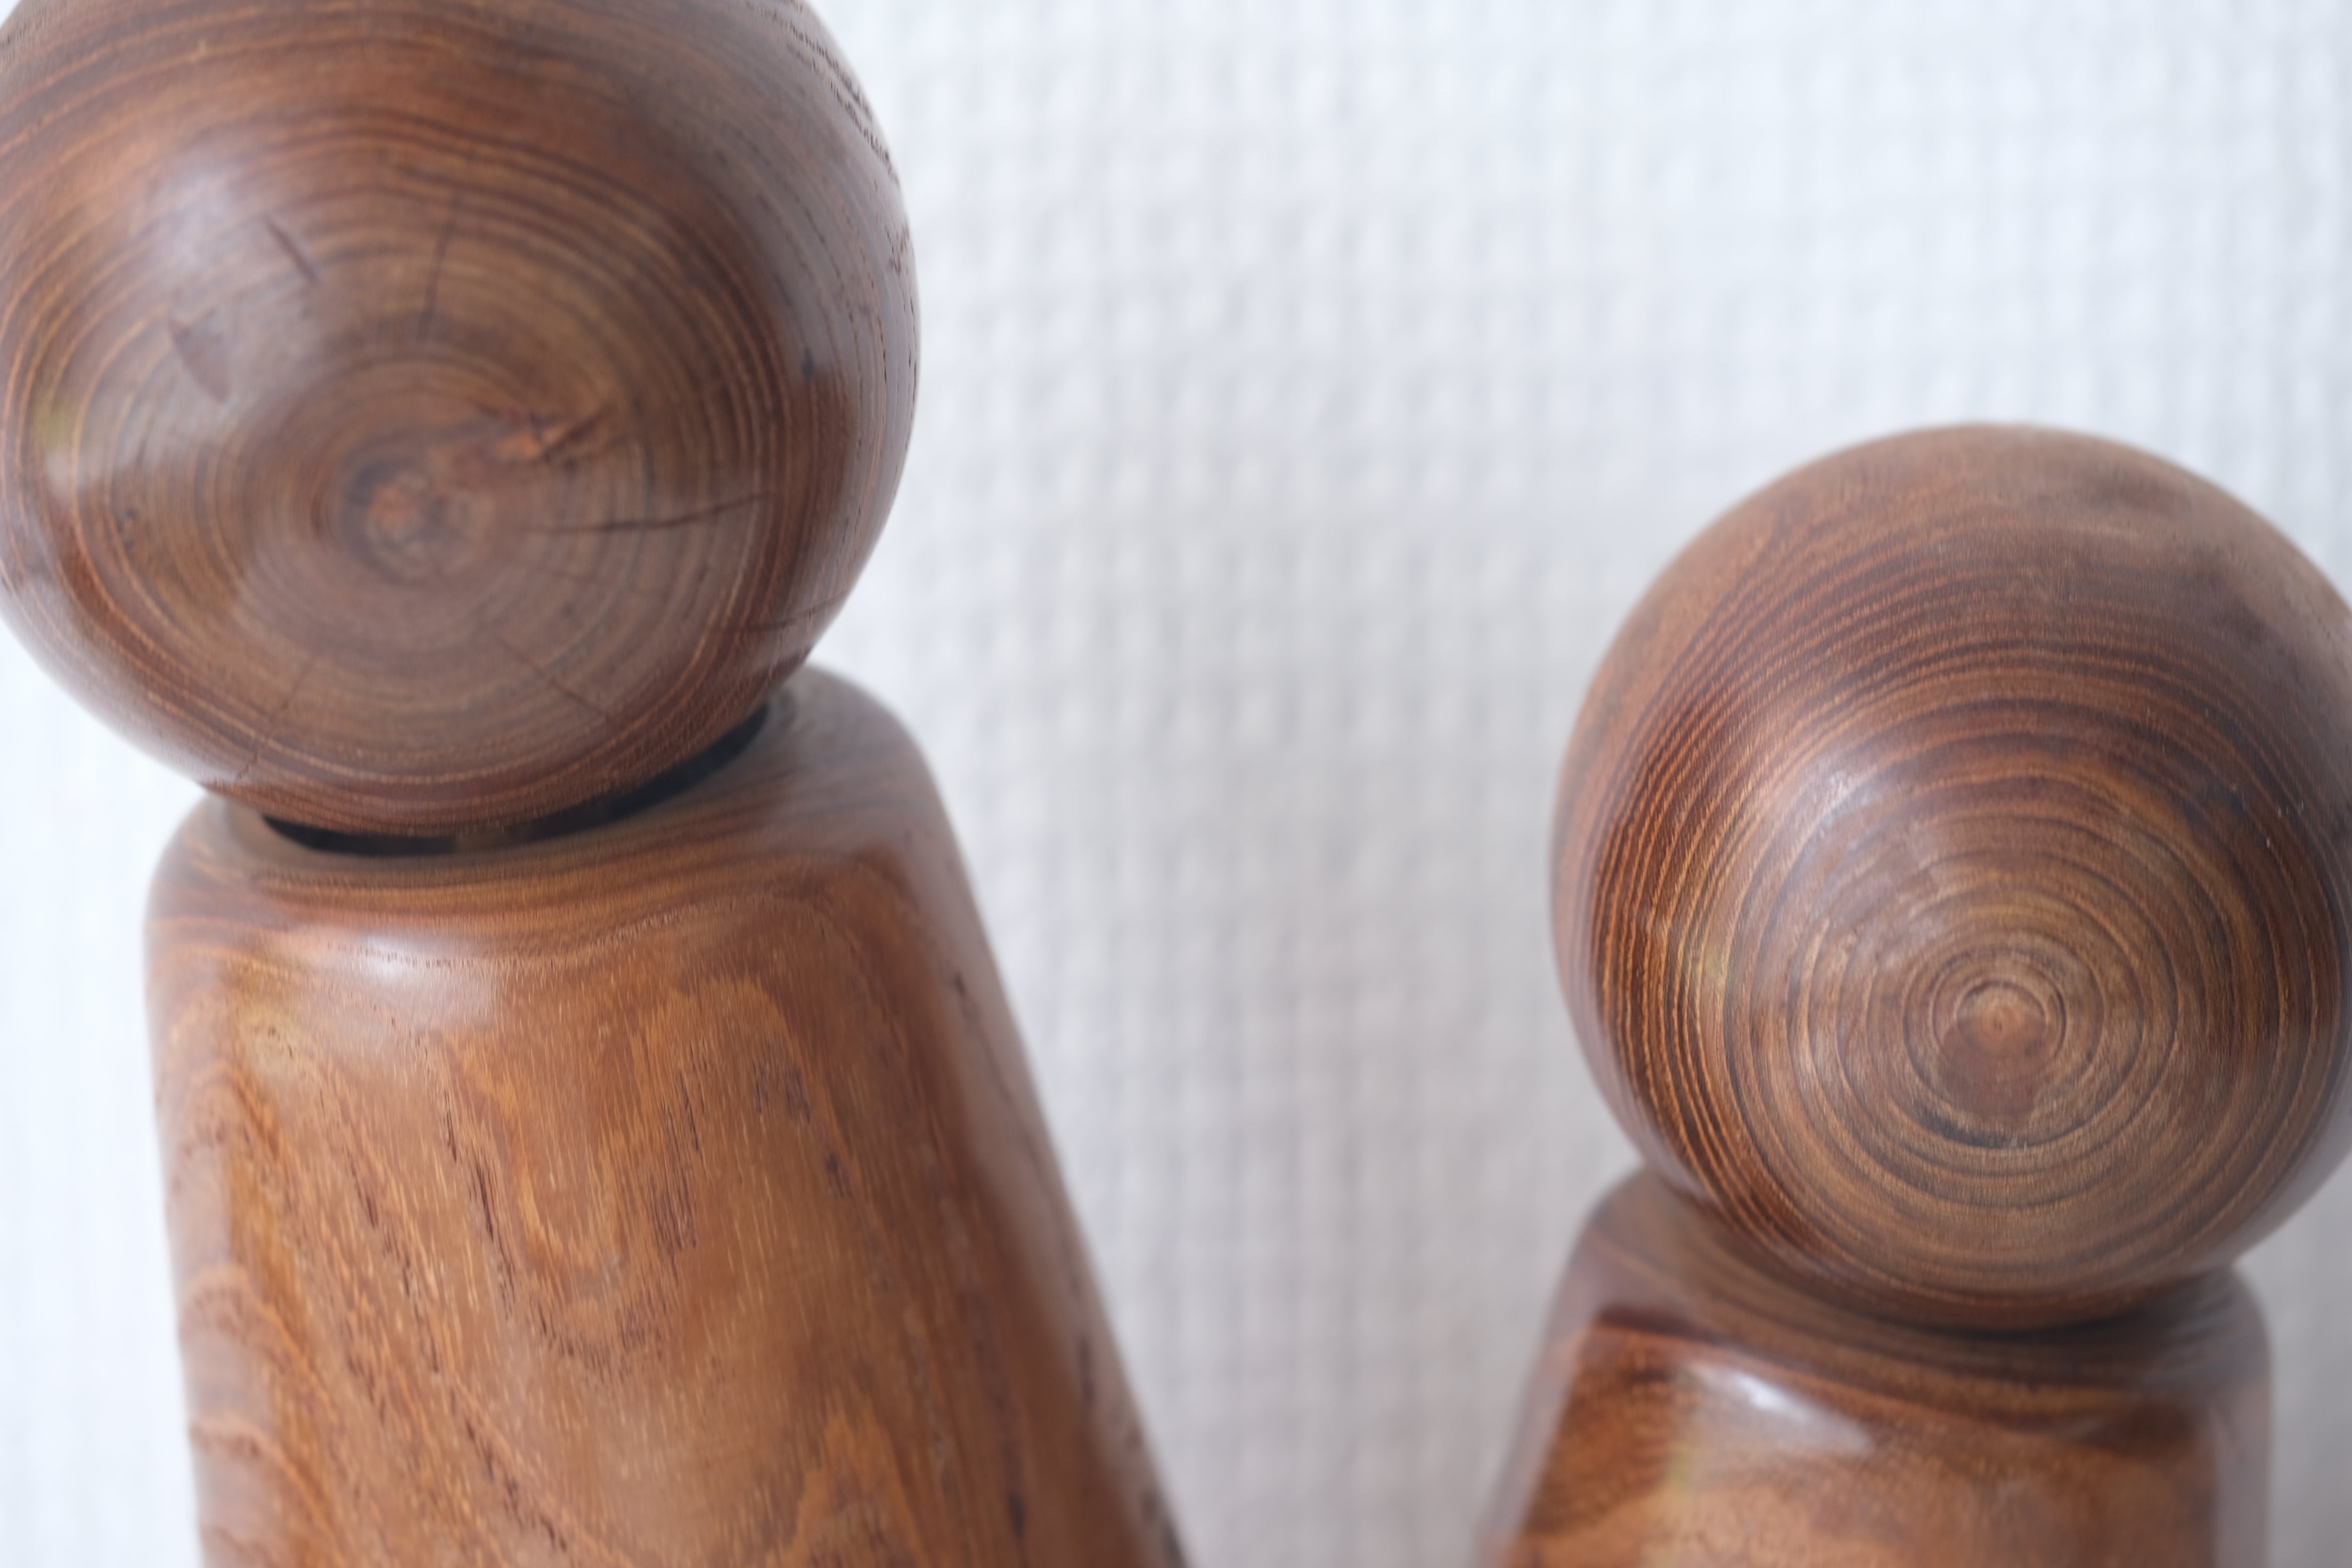 Exclusive Pair of Vintage Creative Kokeshi by Hideo Ishihara (1925-1999) | 17 cm and 21 cm